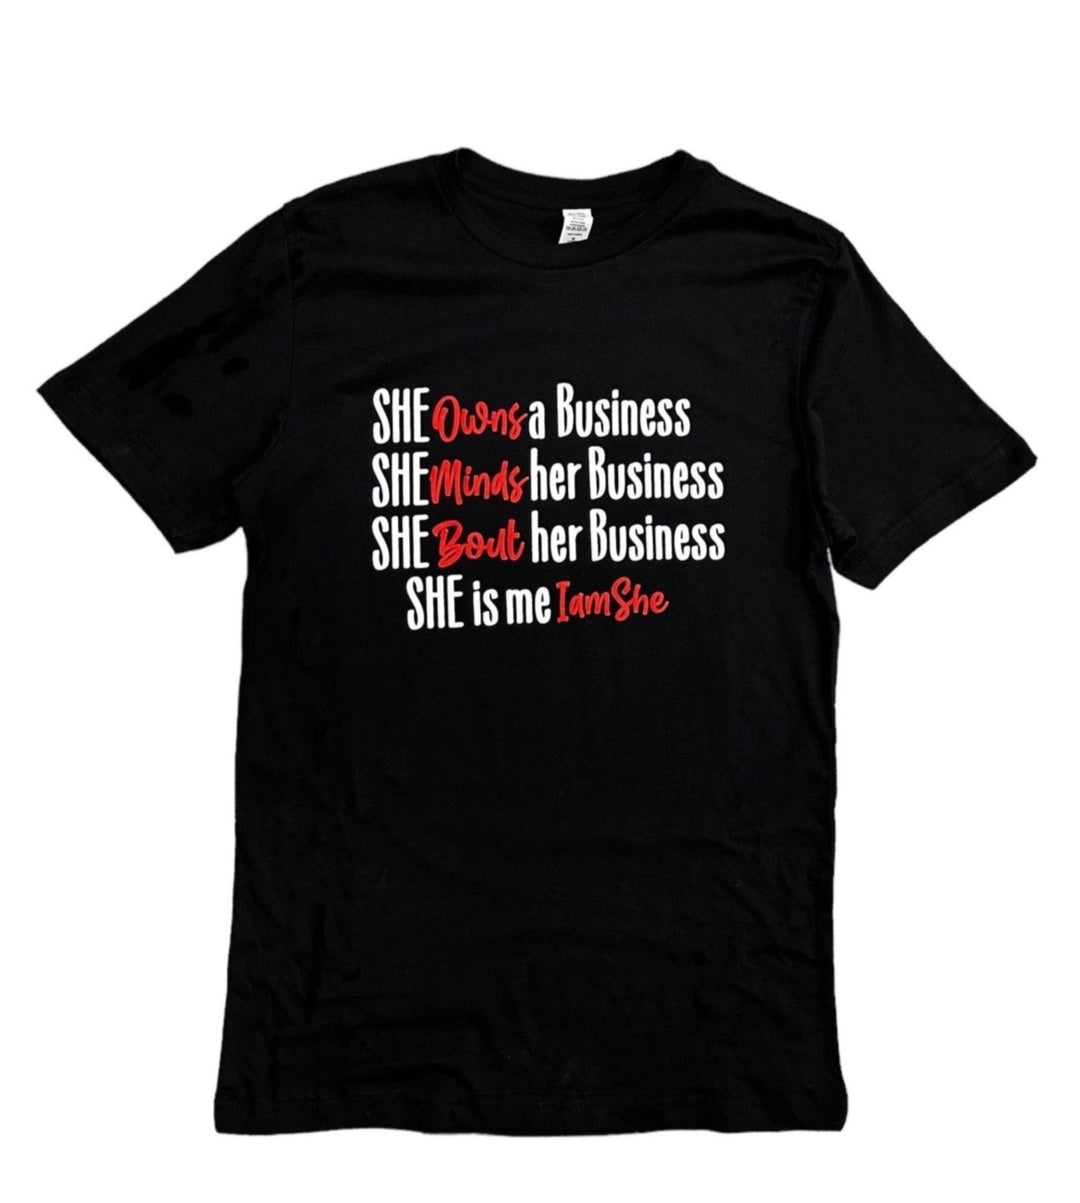 She Owns/Minds/Bout Her Business She is Me I am She T-Shirt  {Unisex}